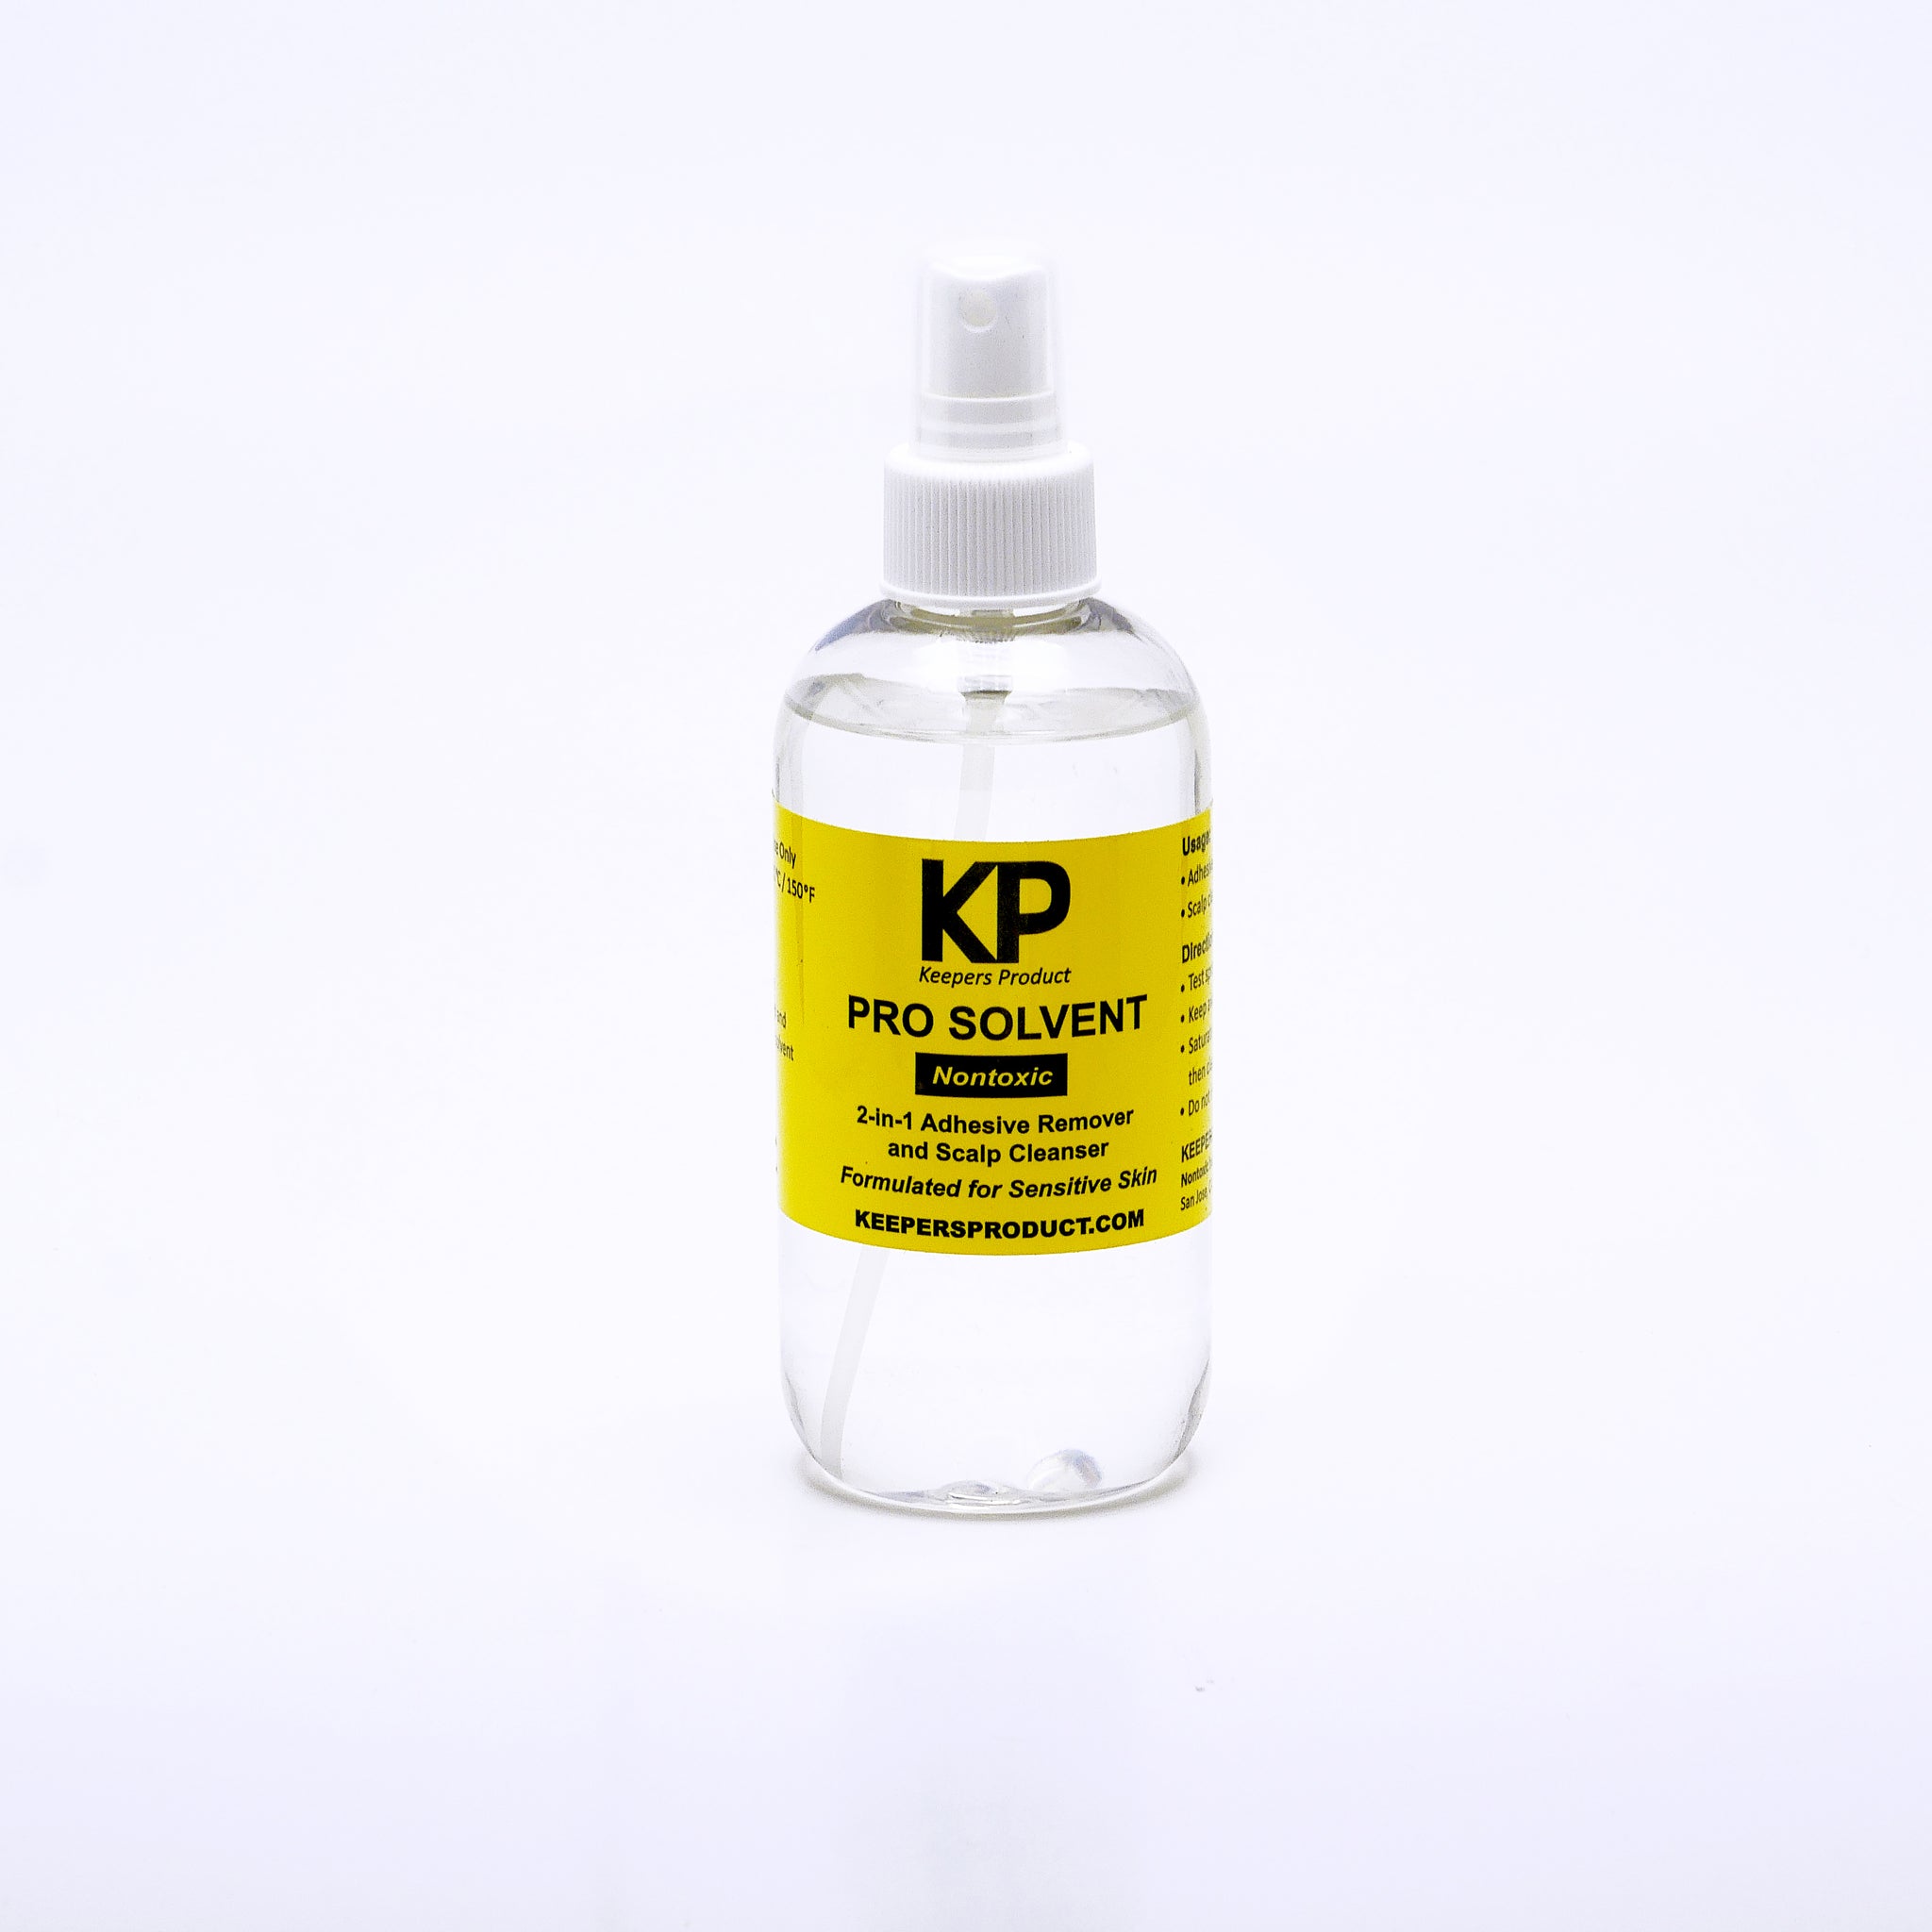 KP PRO SOLVENT - Scalp Cleanser & Adhesive Remover (8oz)